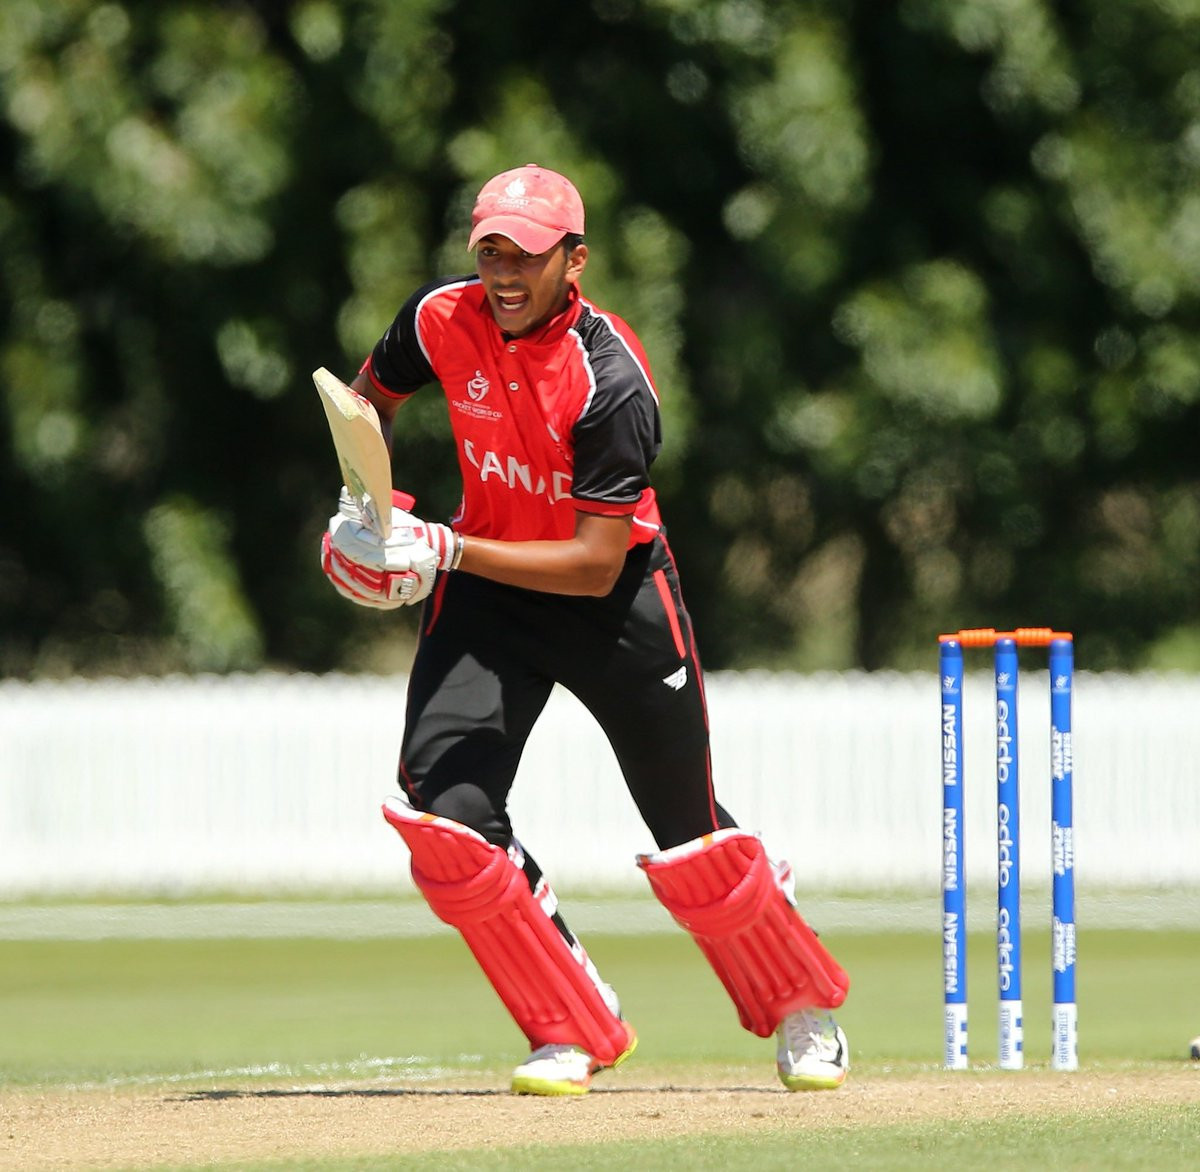 Two plate semi-finalists confirmed at ICC Under-19 Cricket World Cup